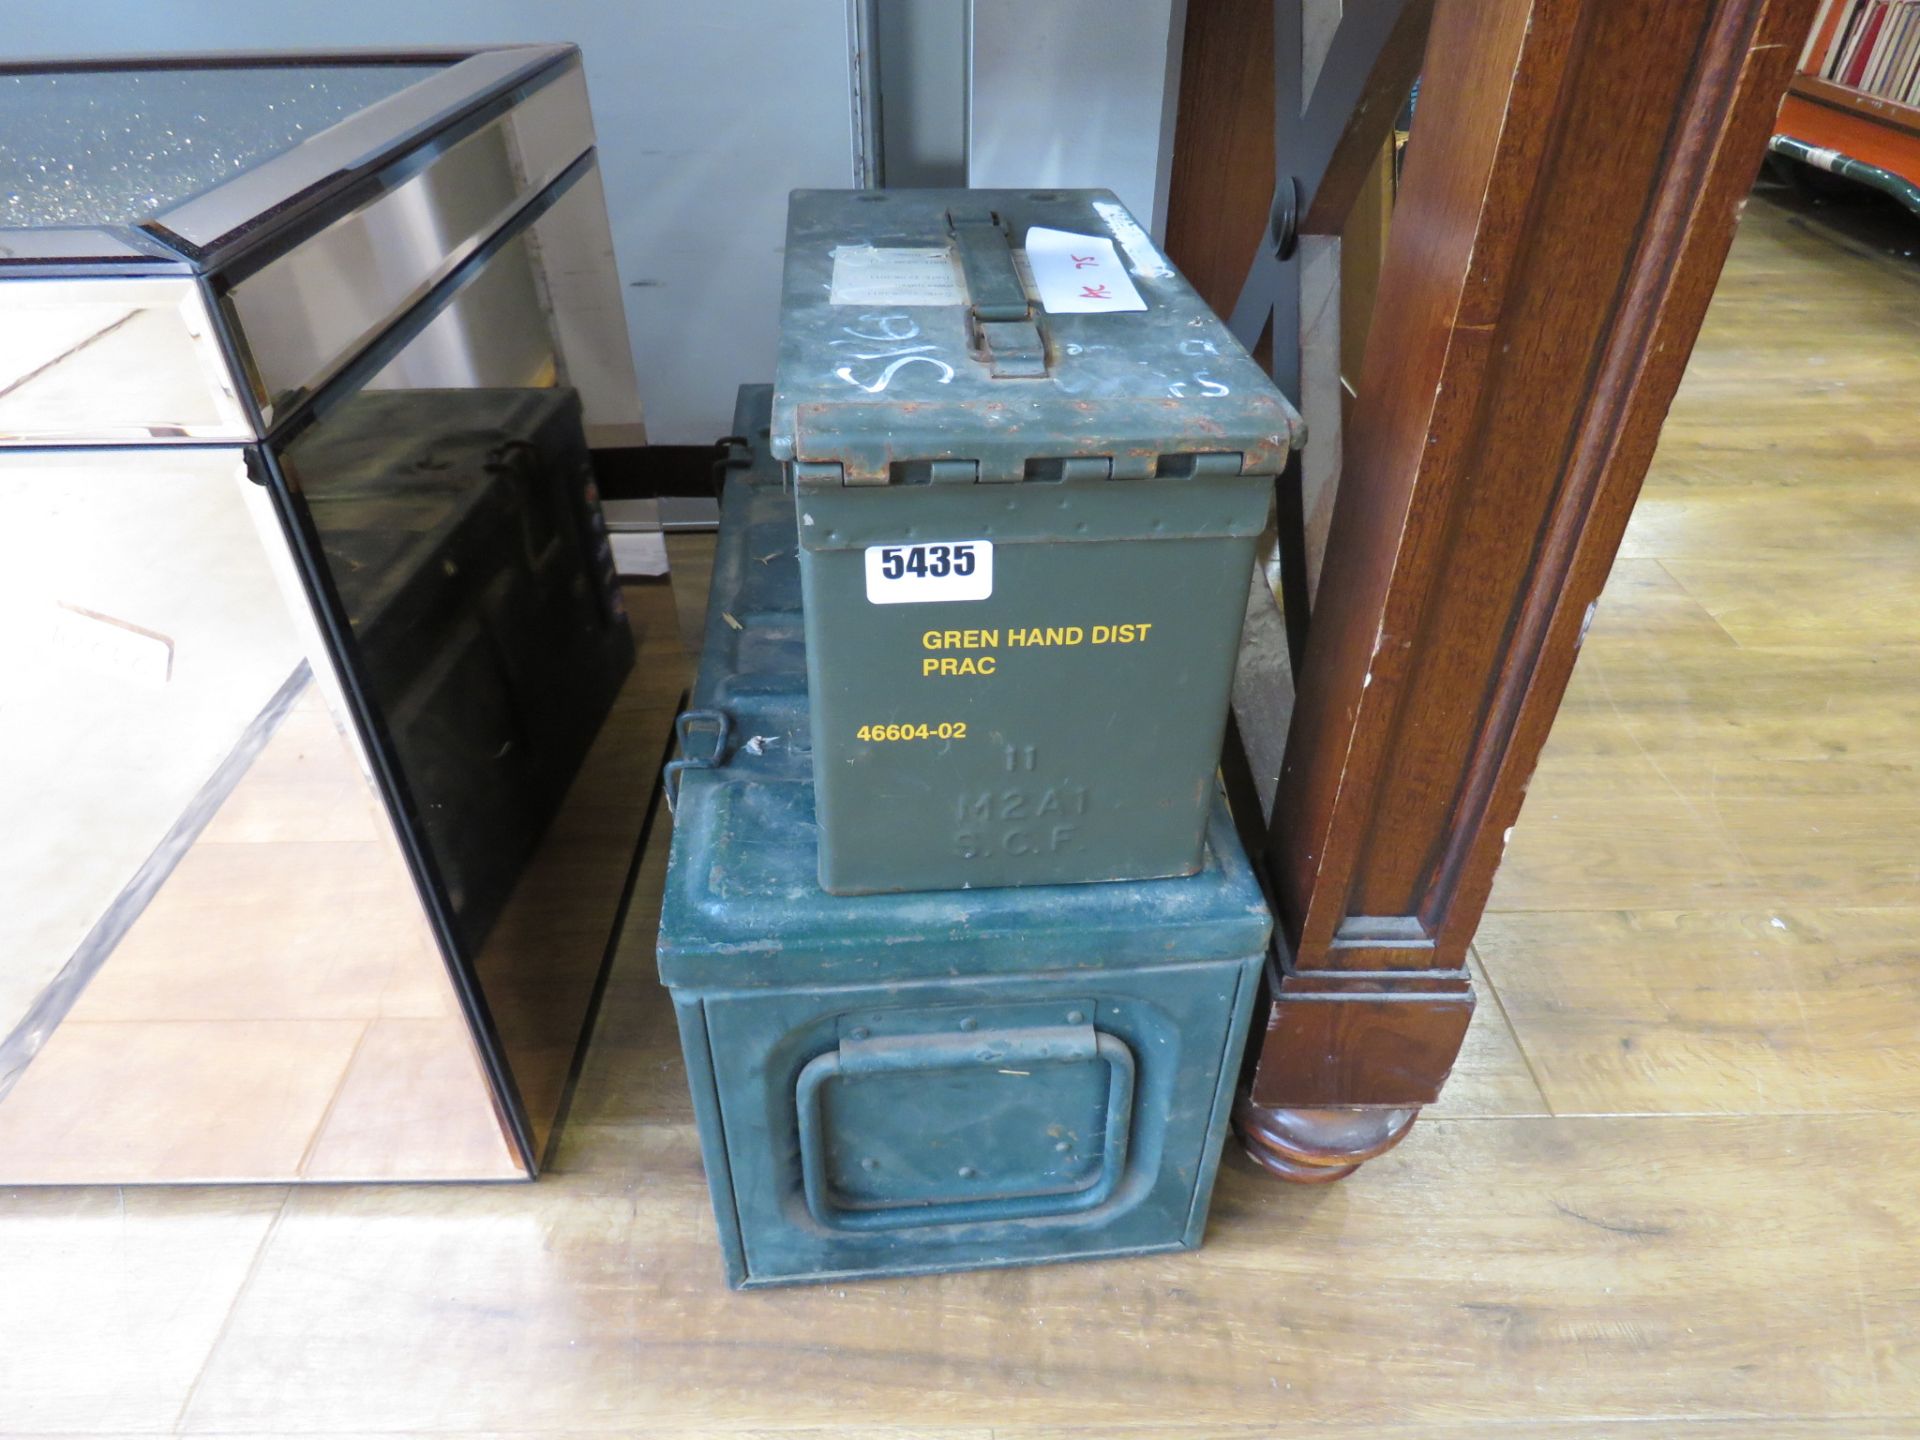 Two military ammunition boxes